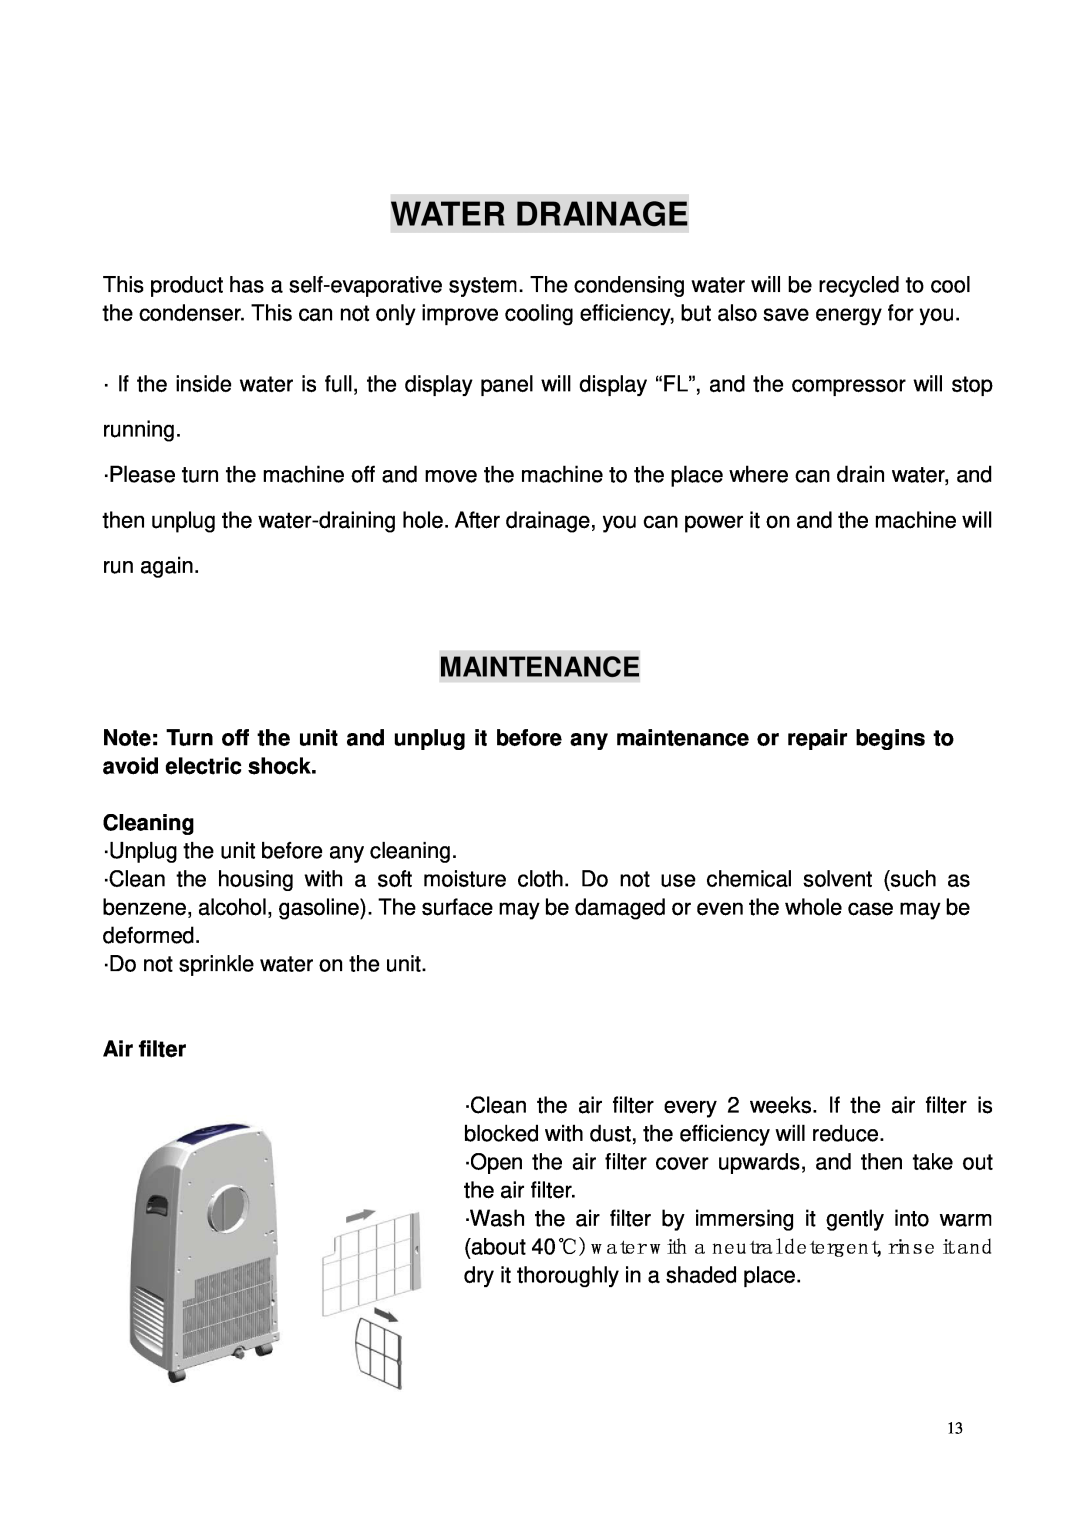 Brada Appliances YPL3-10C instruction manual Water Drainage, Maintenance, Cleaning, Air filter 